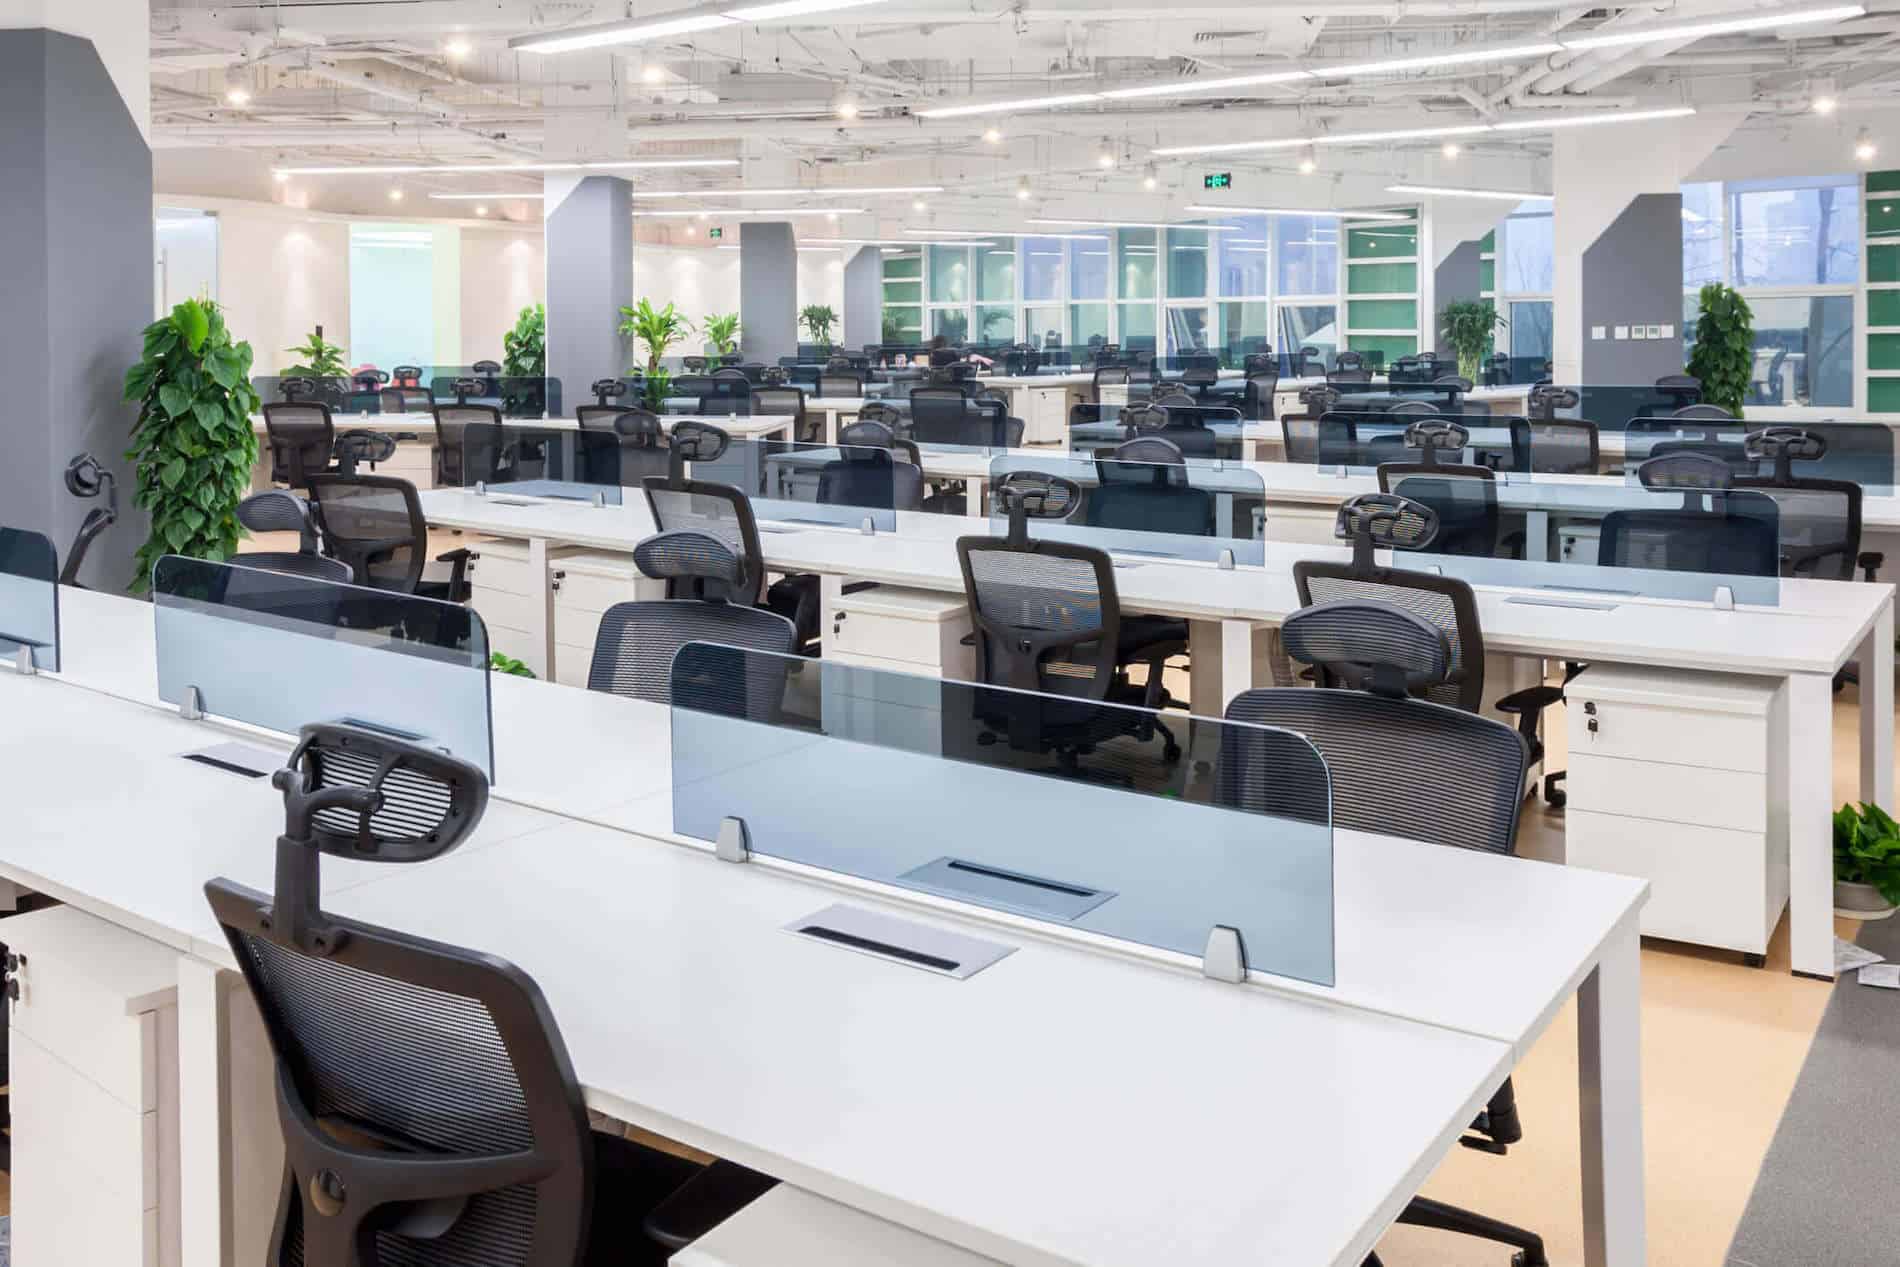 Rows of adjoining desks stretch out across a large, open space in an office building. Each work station features a rolling chair and a filing cabinet.